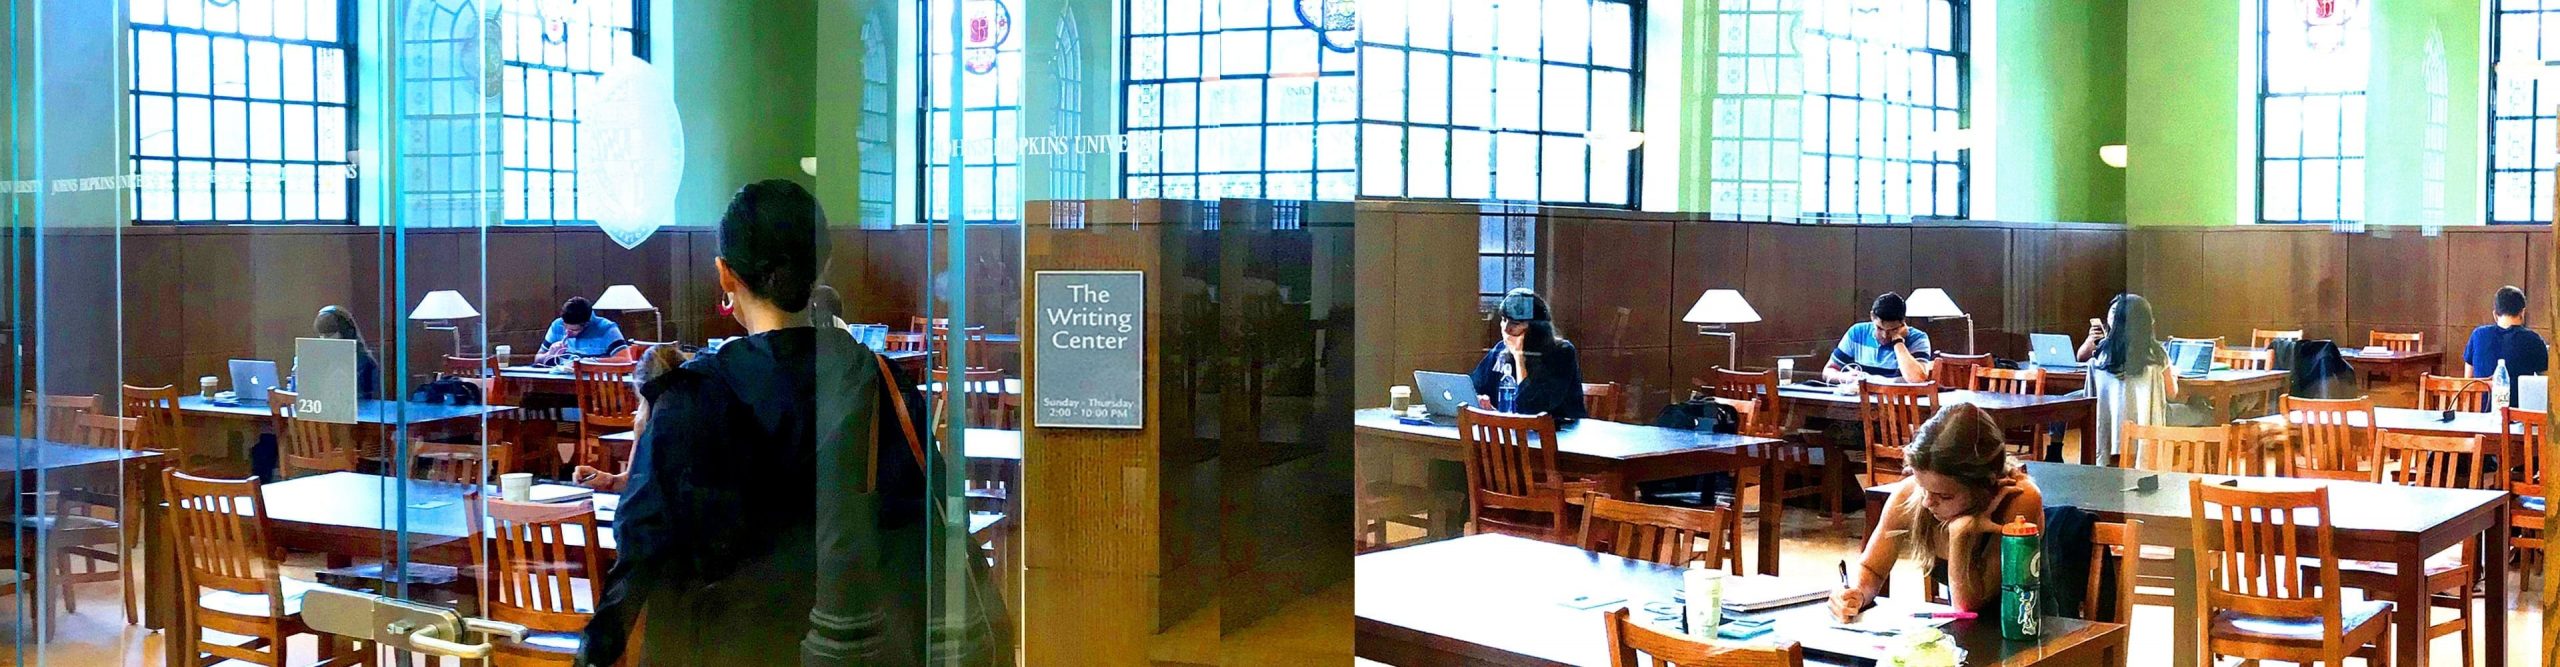 Students studying in a large room with stained glass windows